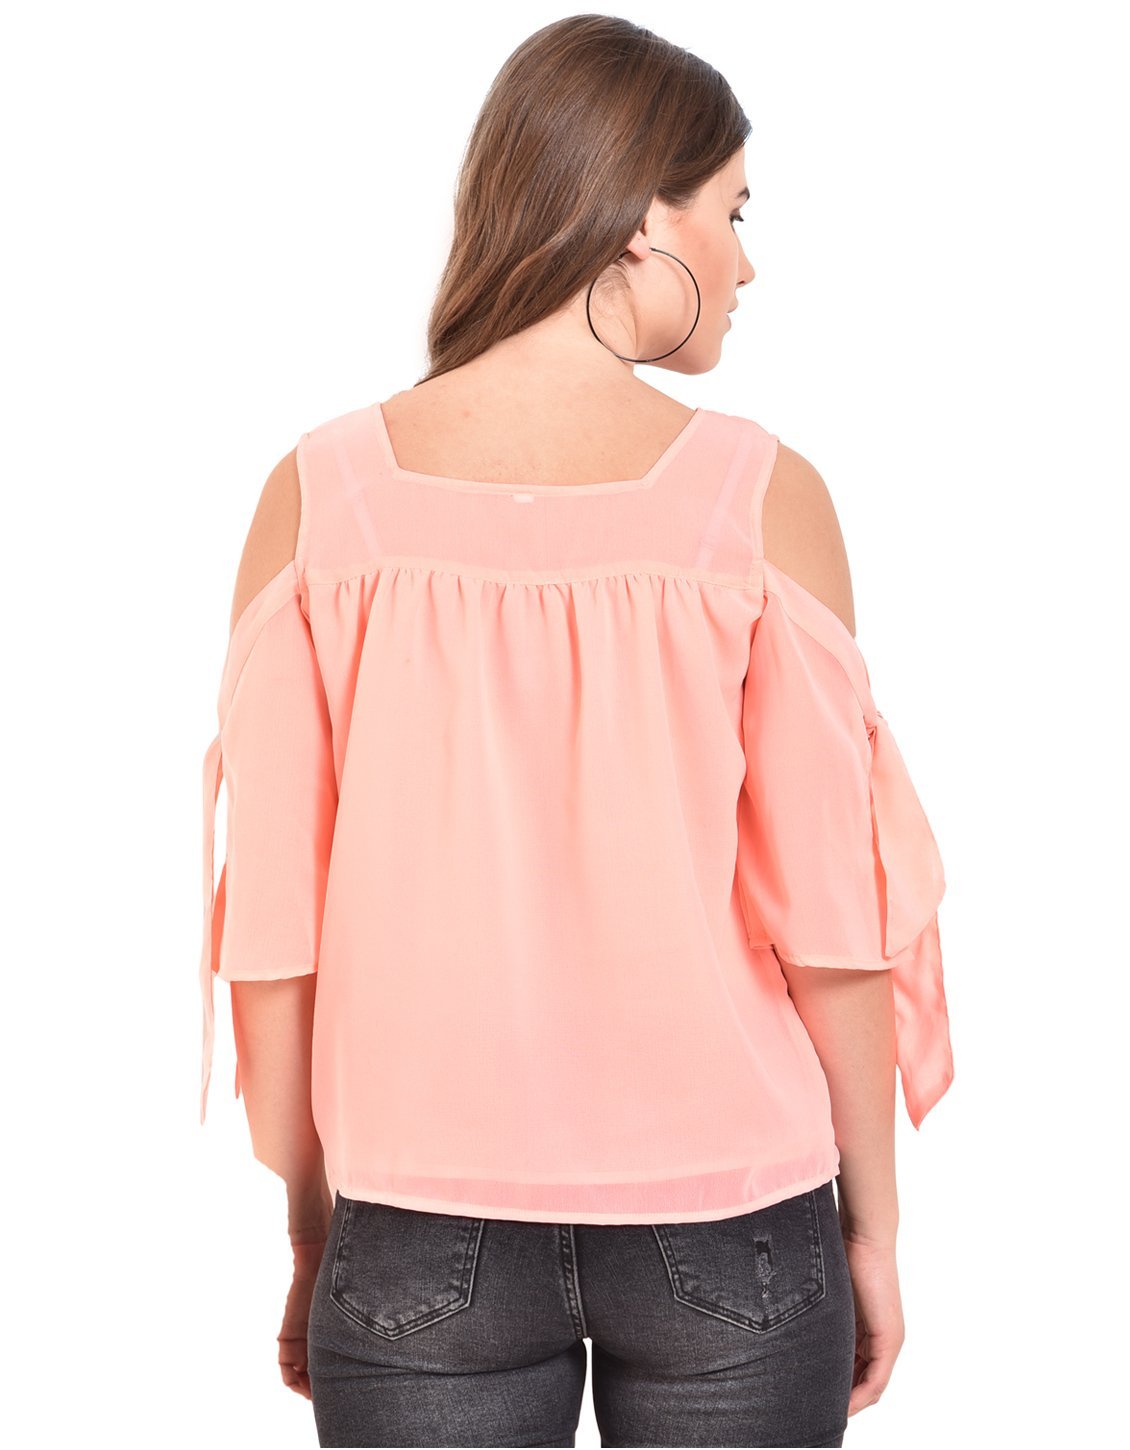 Women's Pink Solid 3/4 Sleeve Round Crepe Casual Top - Myshka